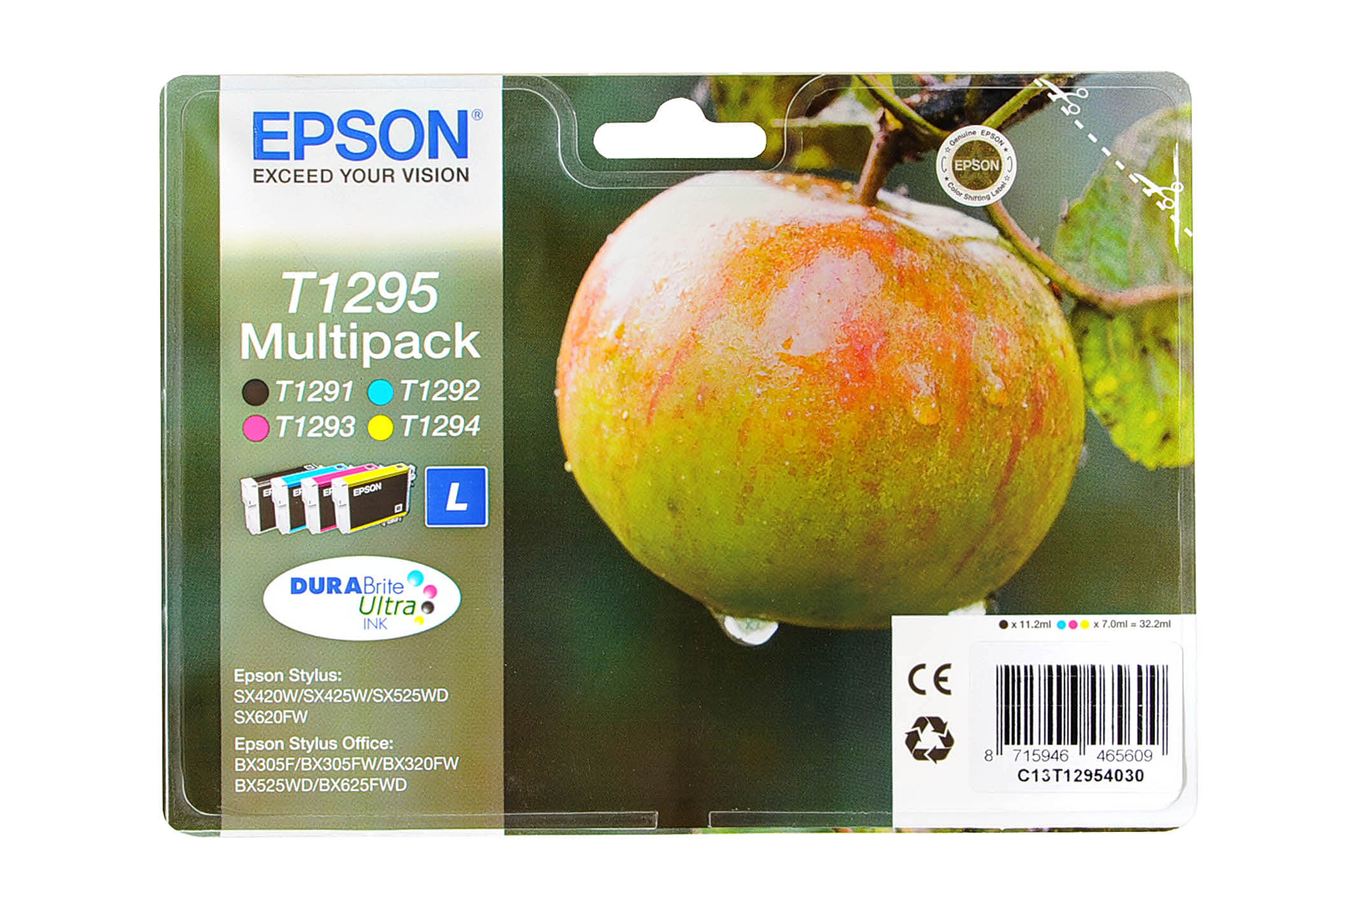 Cartouche d'encre Epson T1295 PACK - T1295PACK (1257285) | Darty